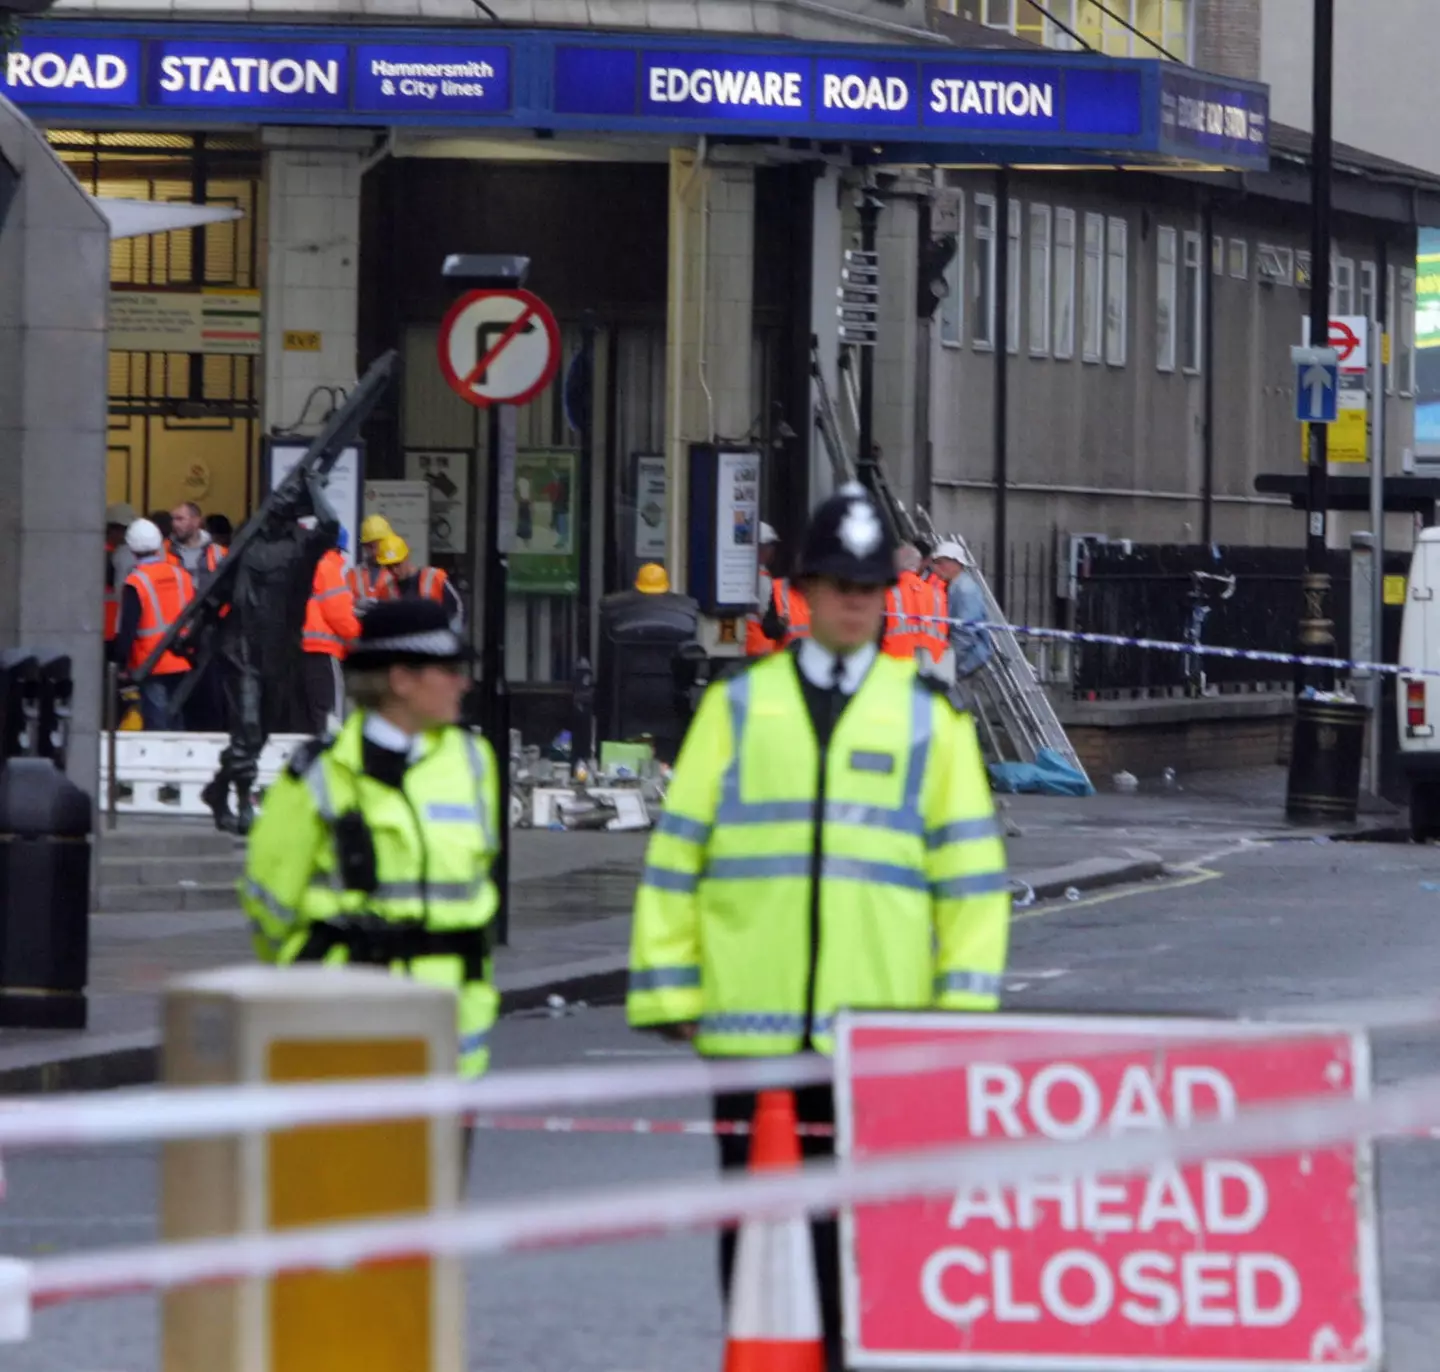 Edgware Road, London, was one location a bomb went off in the 2005 ordeal.